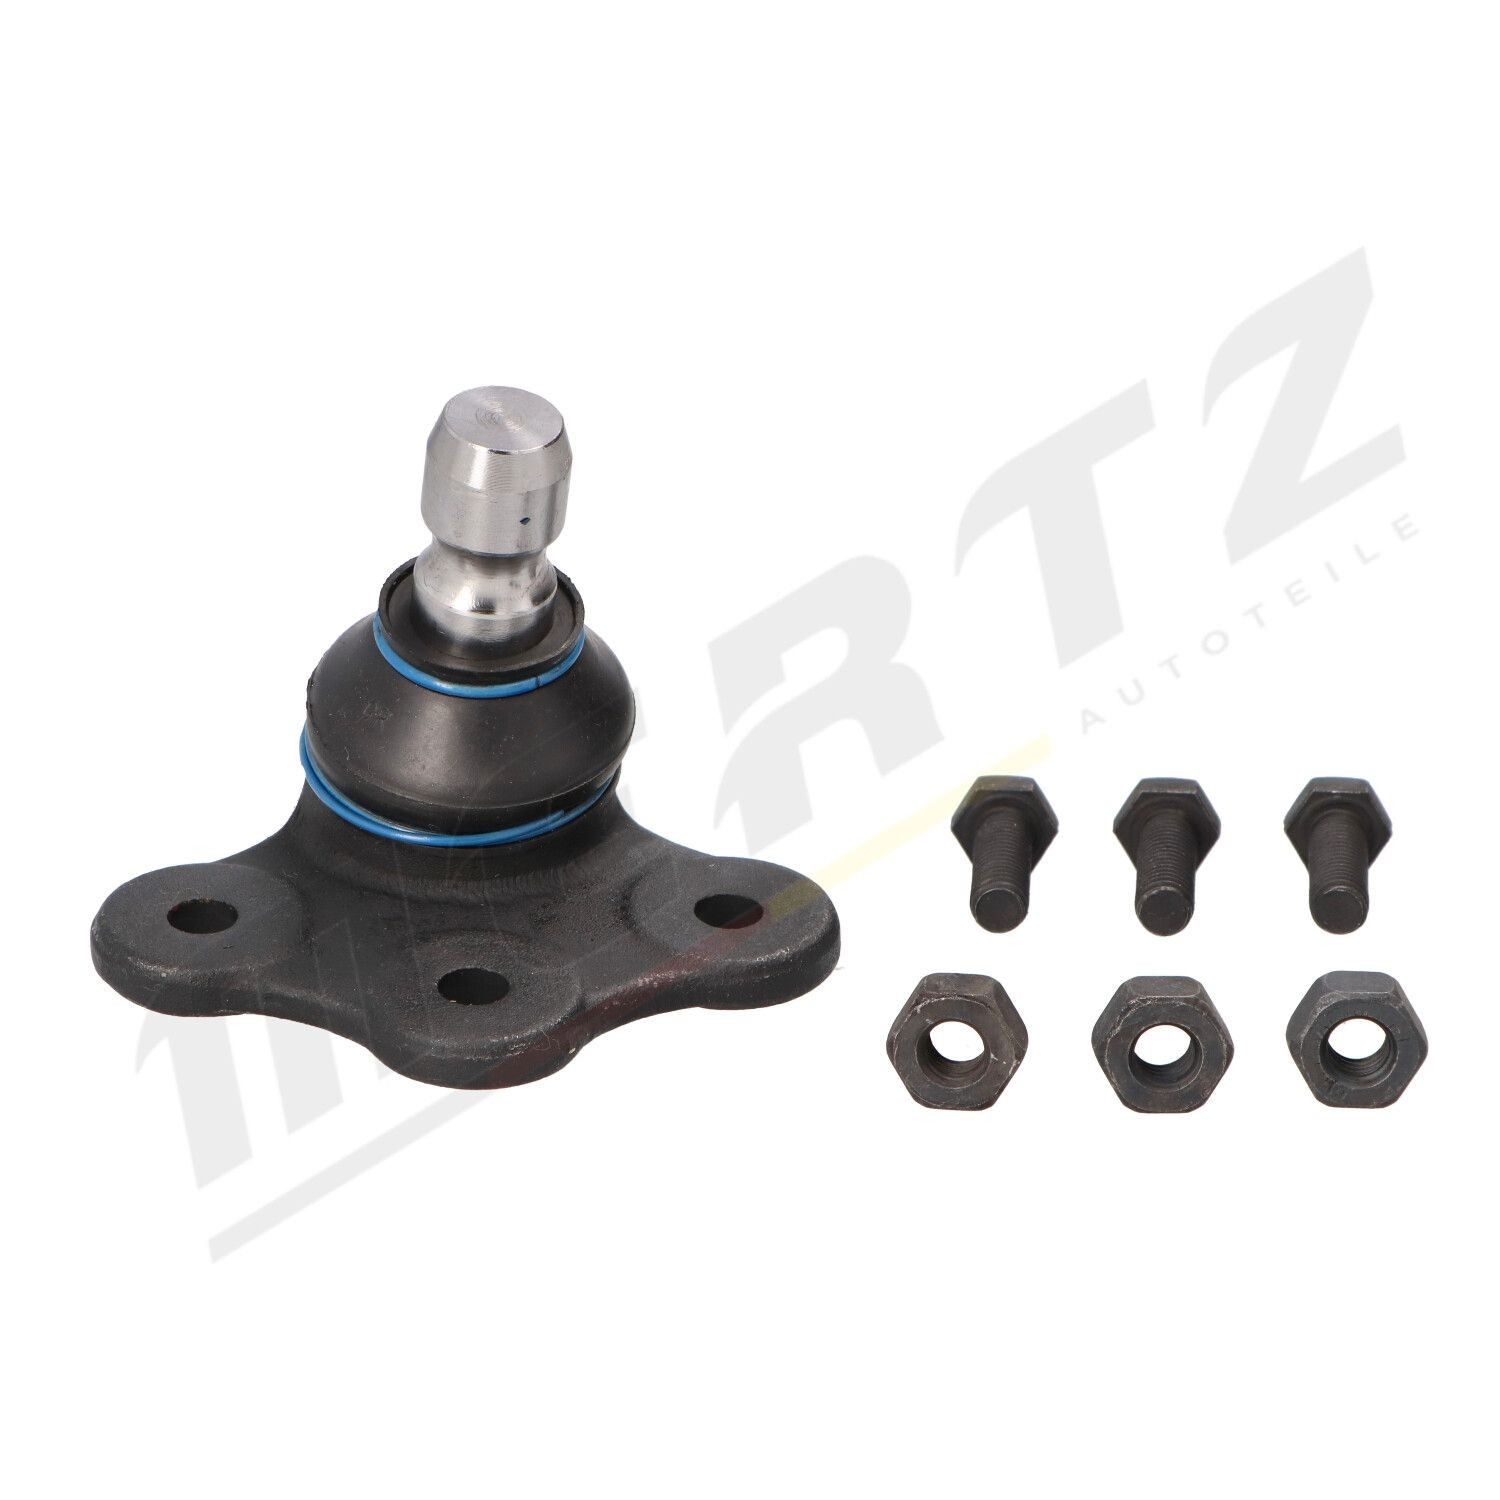 Suspension ball joint MERTZ Front Axle Left, Front Axle Right, with nut, with bolts/screws, 18mm - M-S0225